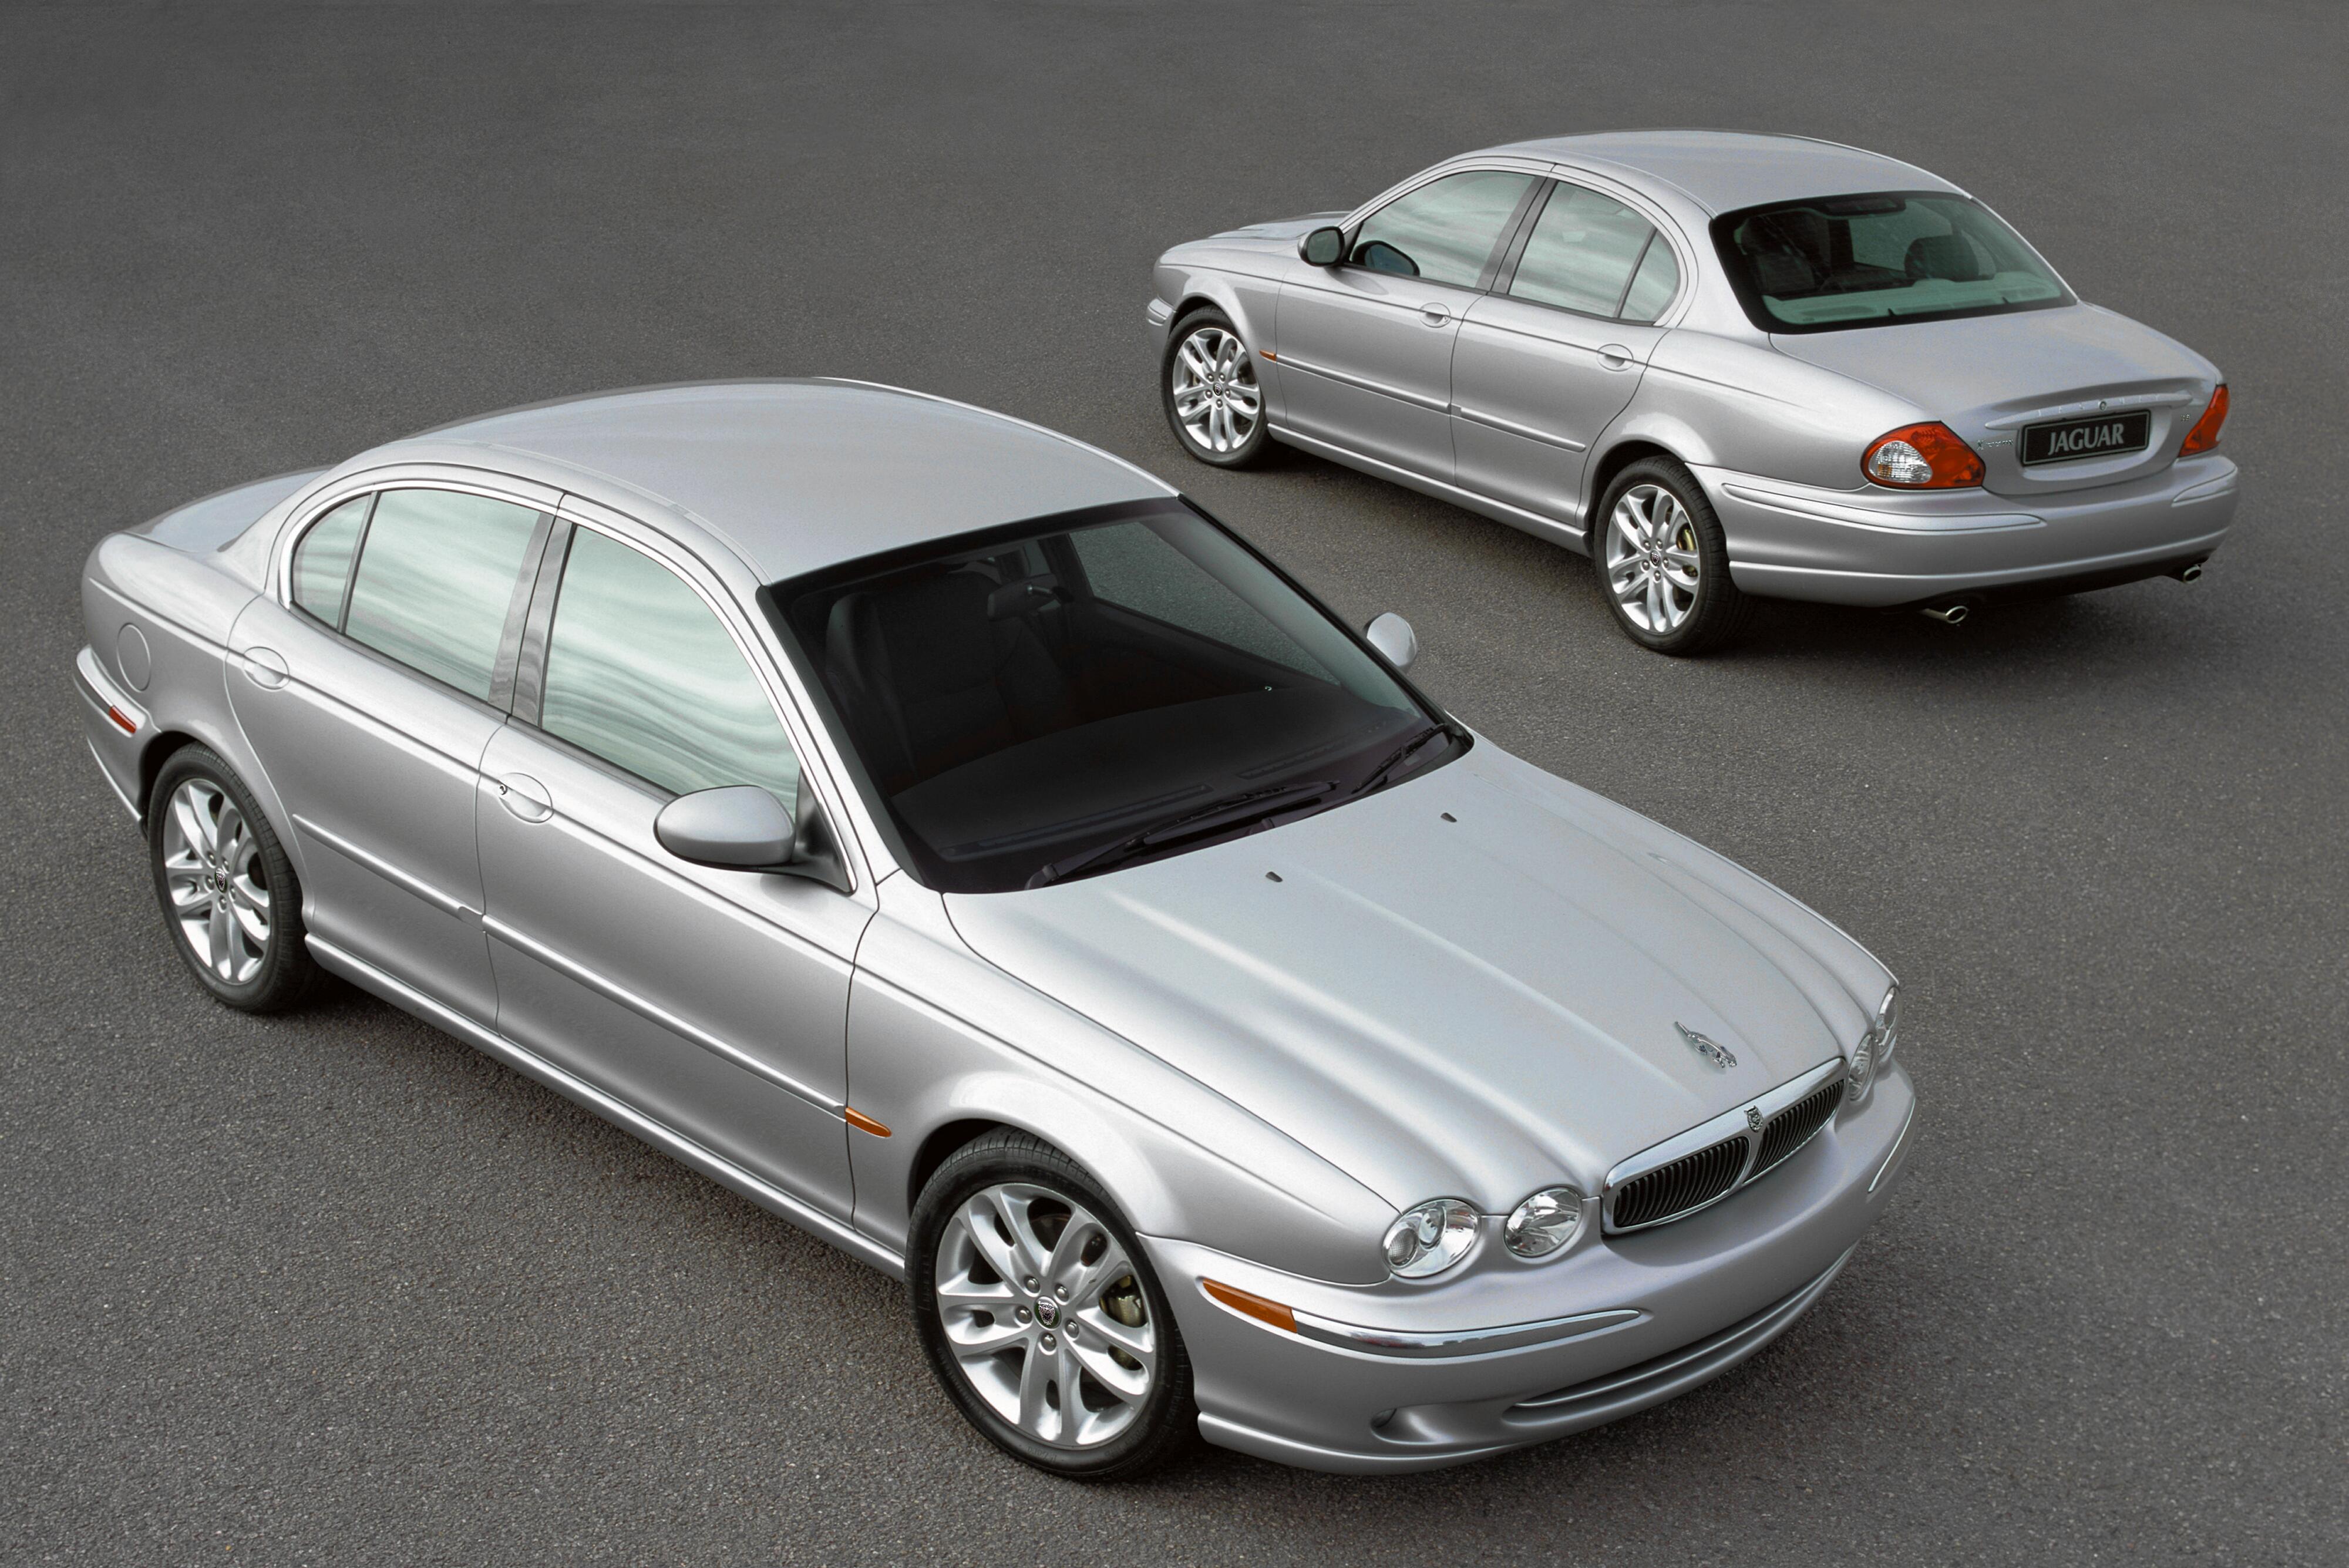 381414 02: Ford Motor Co.''s Jaguar division has announced that the new entry level sedan, commonly known as the  Baby Jag,  will be named the X-Type. The various models seen in this publicity photograph will go on sale later in 2001. (Photo courtesy of Ford Motor Co./Newsmakers)